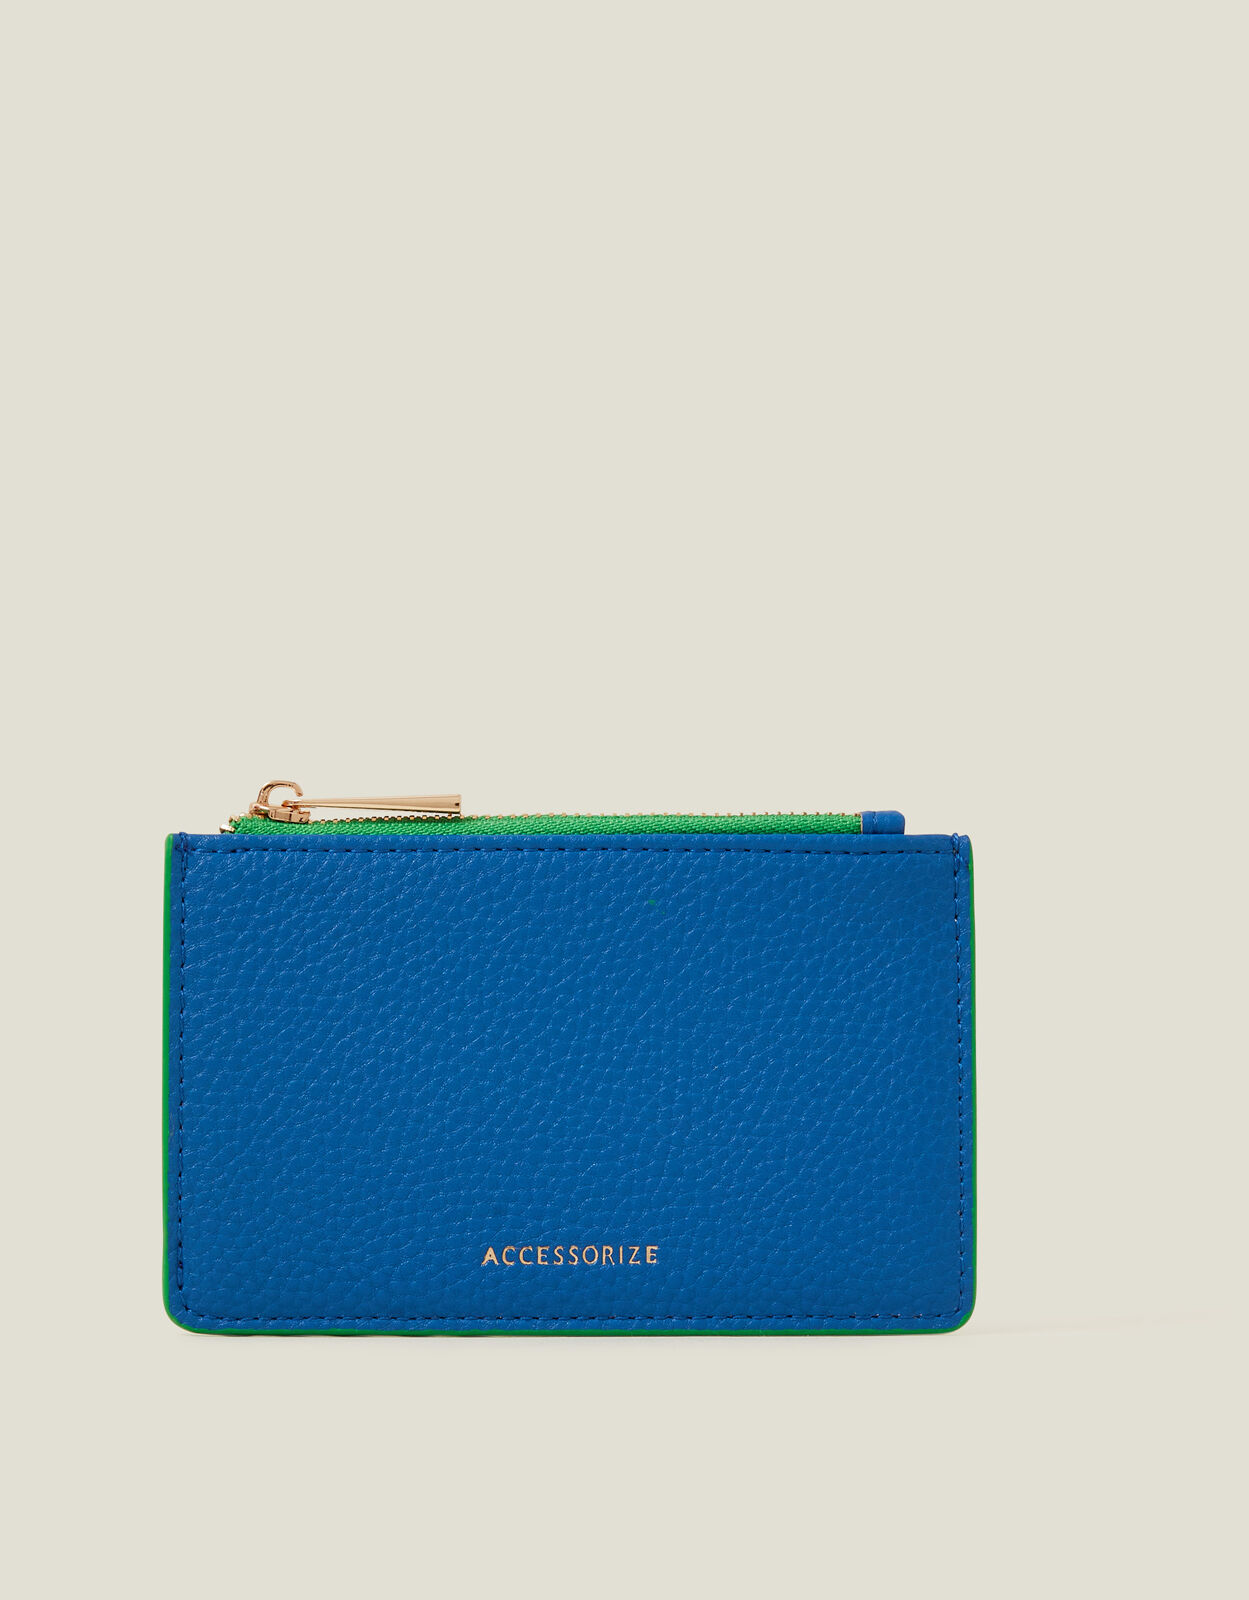 Card Holders for Women | Credit Card Holders | Accessorize UK